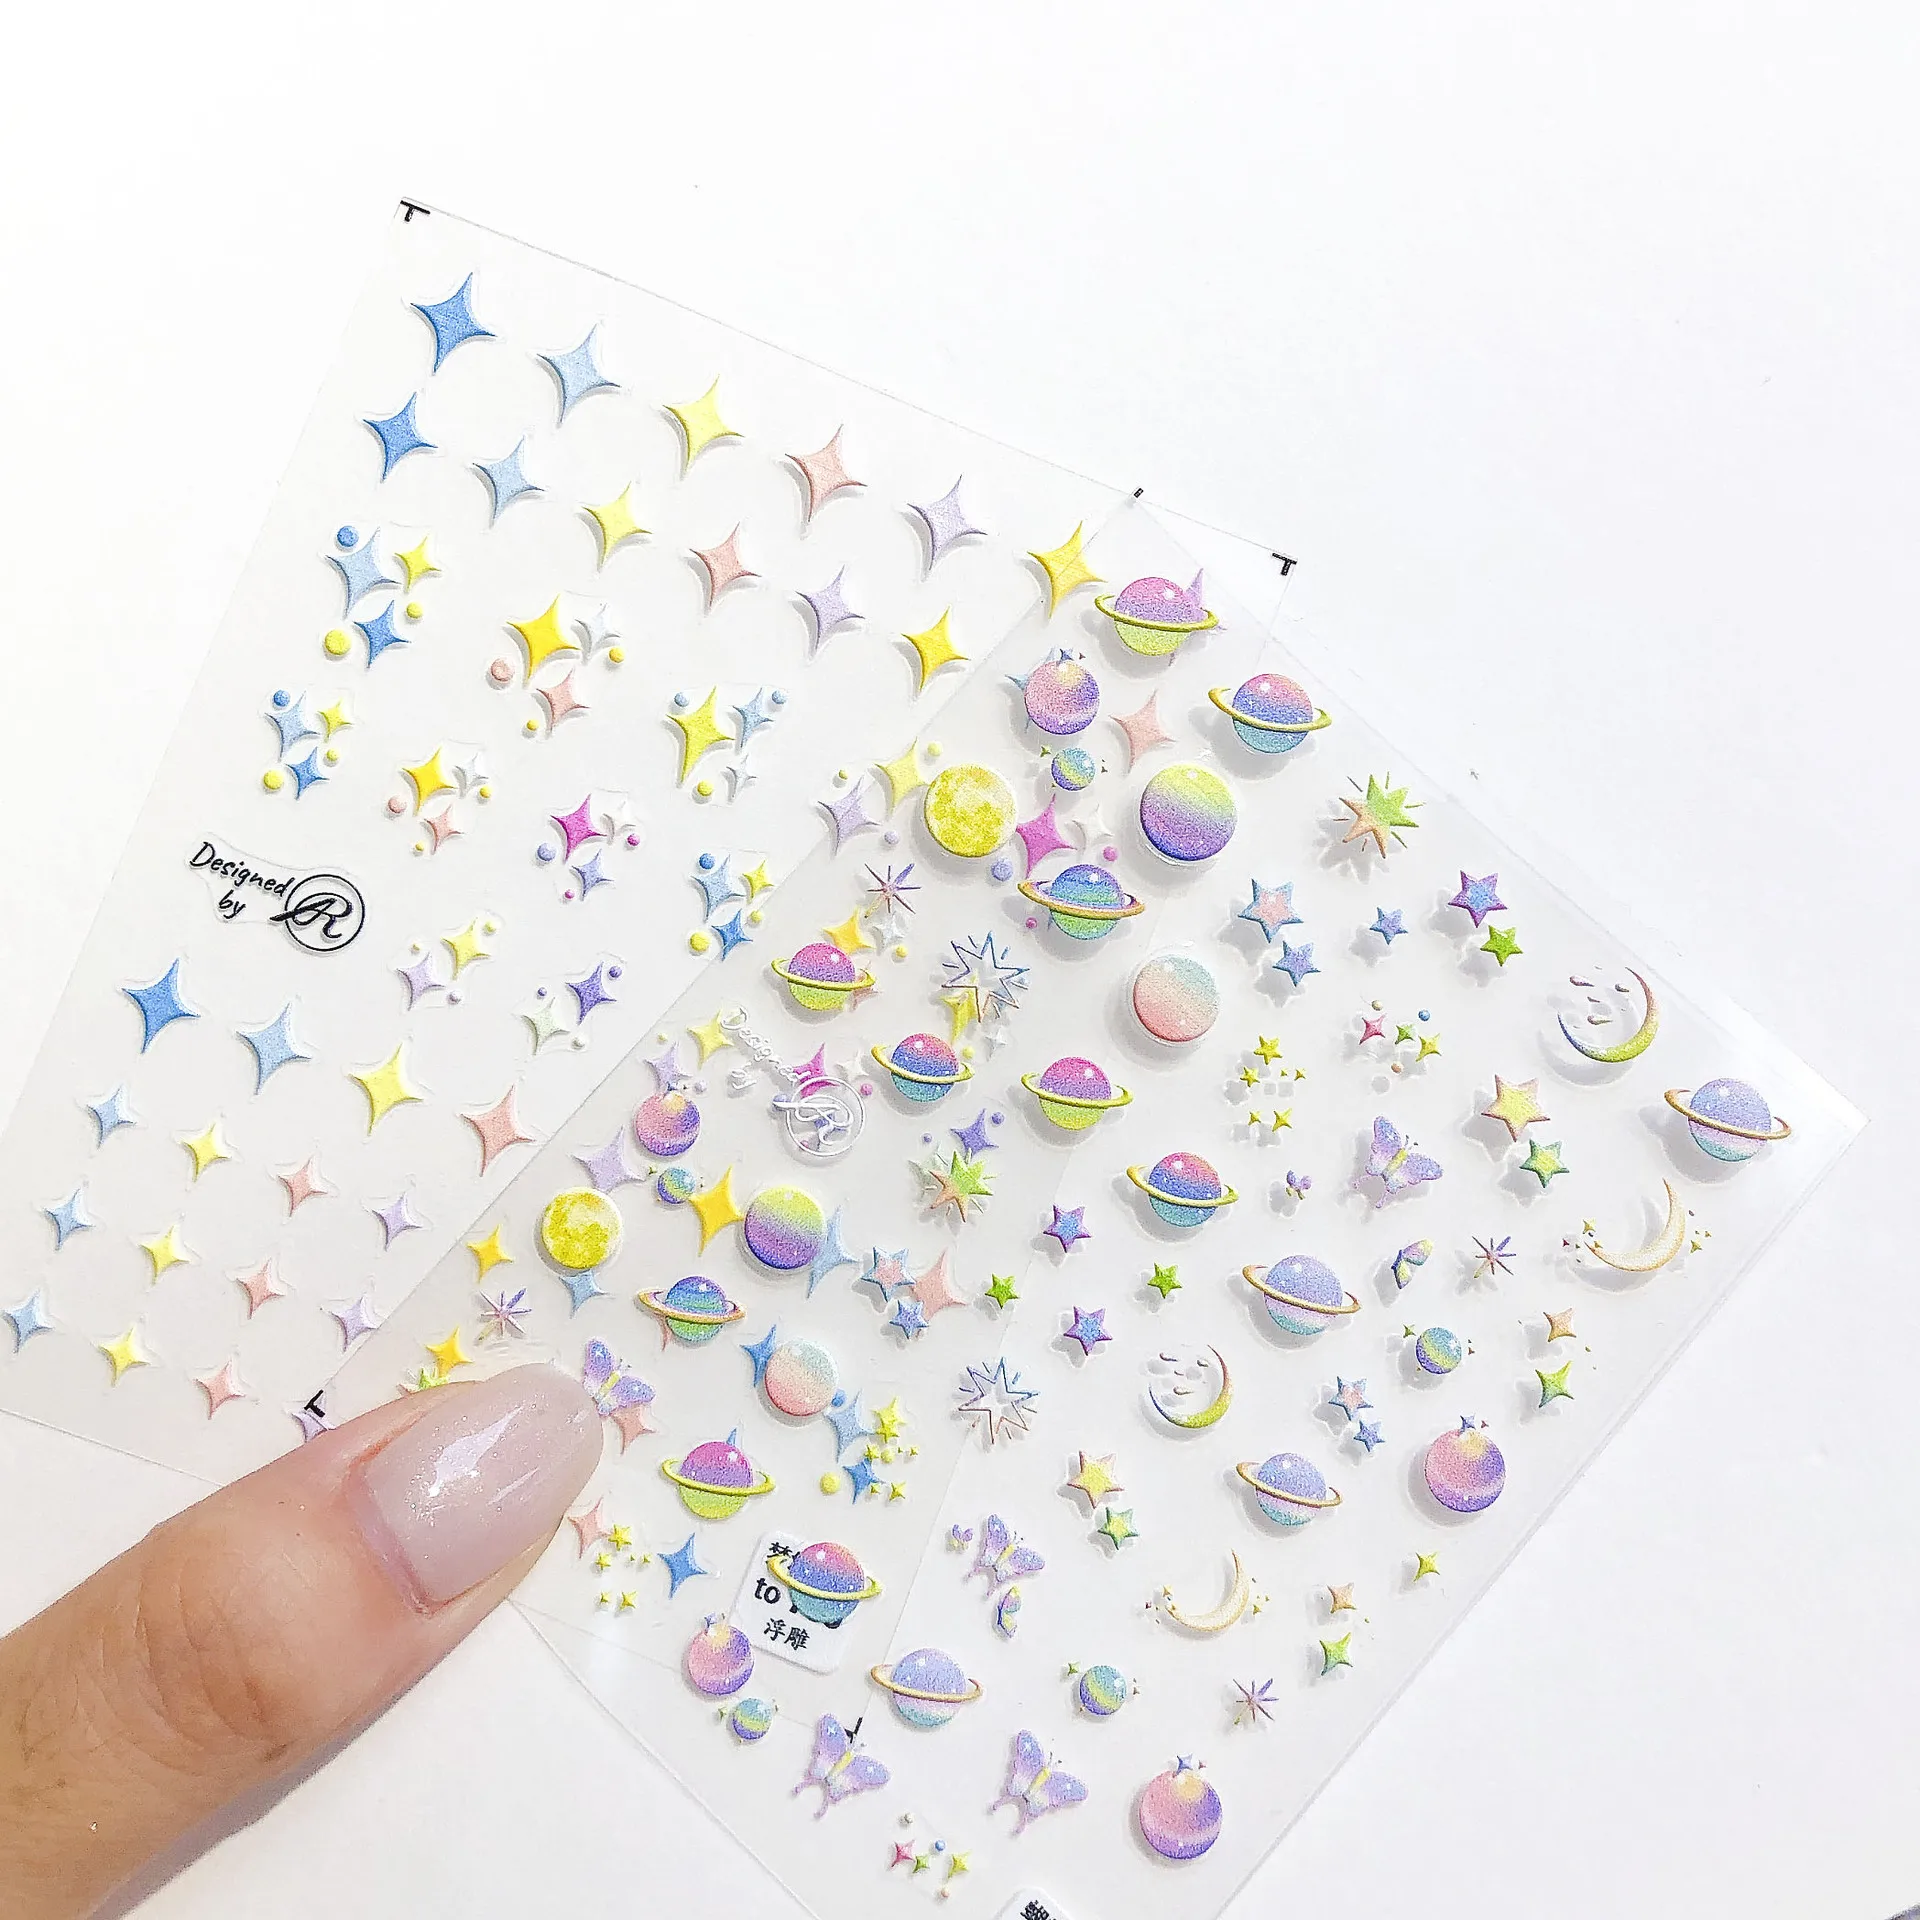 

Moon Stars Planet Earth Adhesive Nail Stickers Starry Sky Galaxy Geometry Butterfly Decoration DIY Nails Art 5D Decals